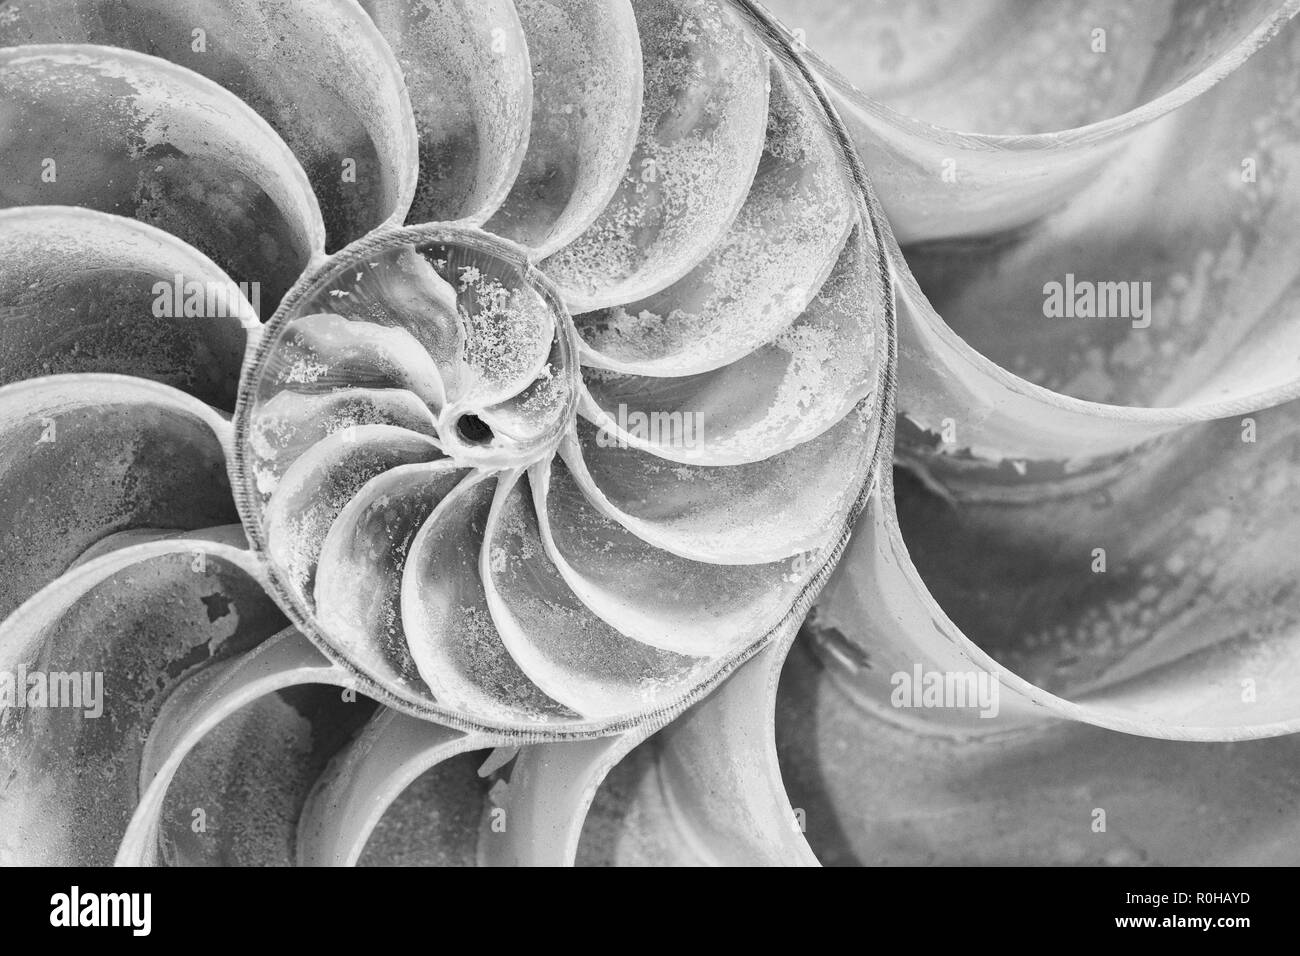 Closeup of the cross section of a nautilus shell in black and white Stock Photo